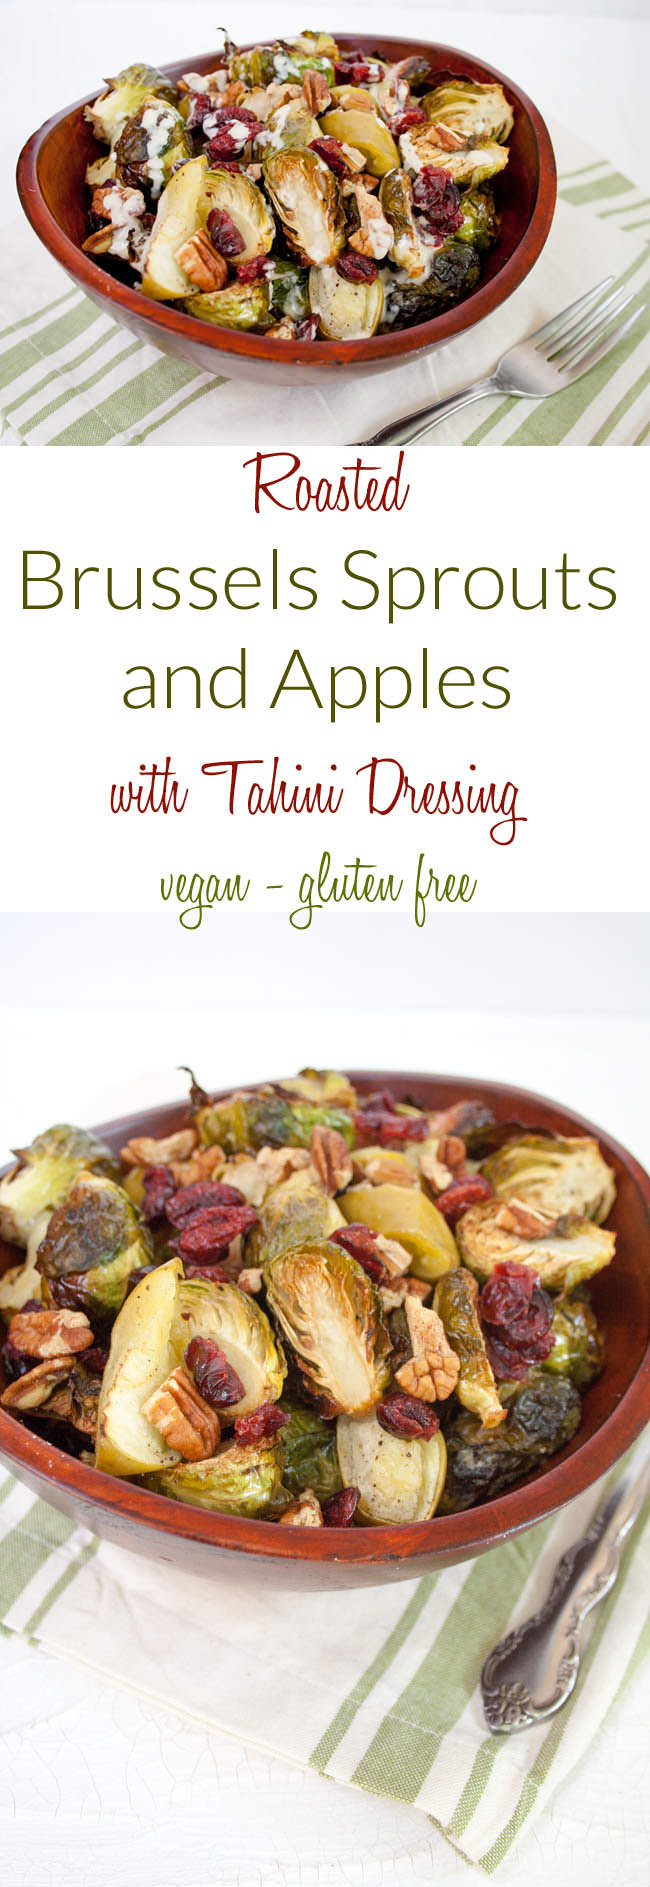 Roasted Brussels Sprouts and Apples with Tahini Dressing collage photo with text.